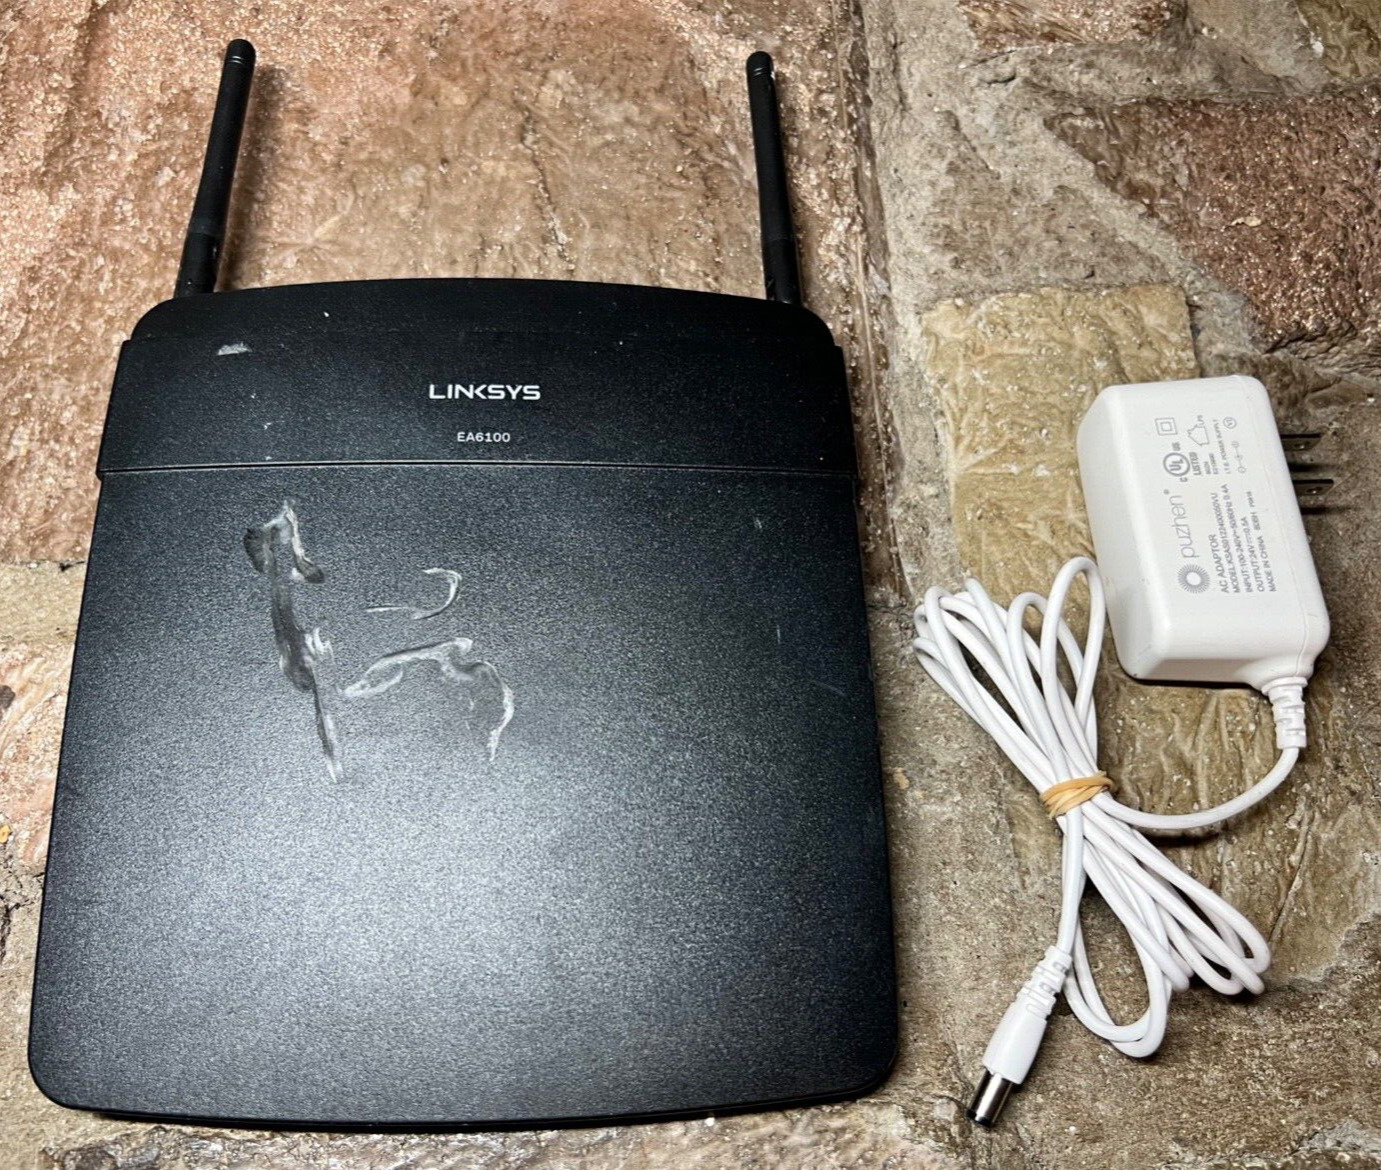 Cisco Linksys EA6100 Dual Band AC1200 Smart Wi-Fi Router w/ Power Cord